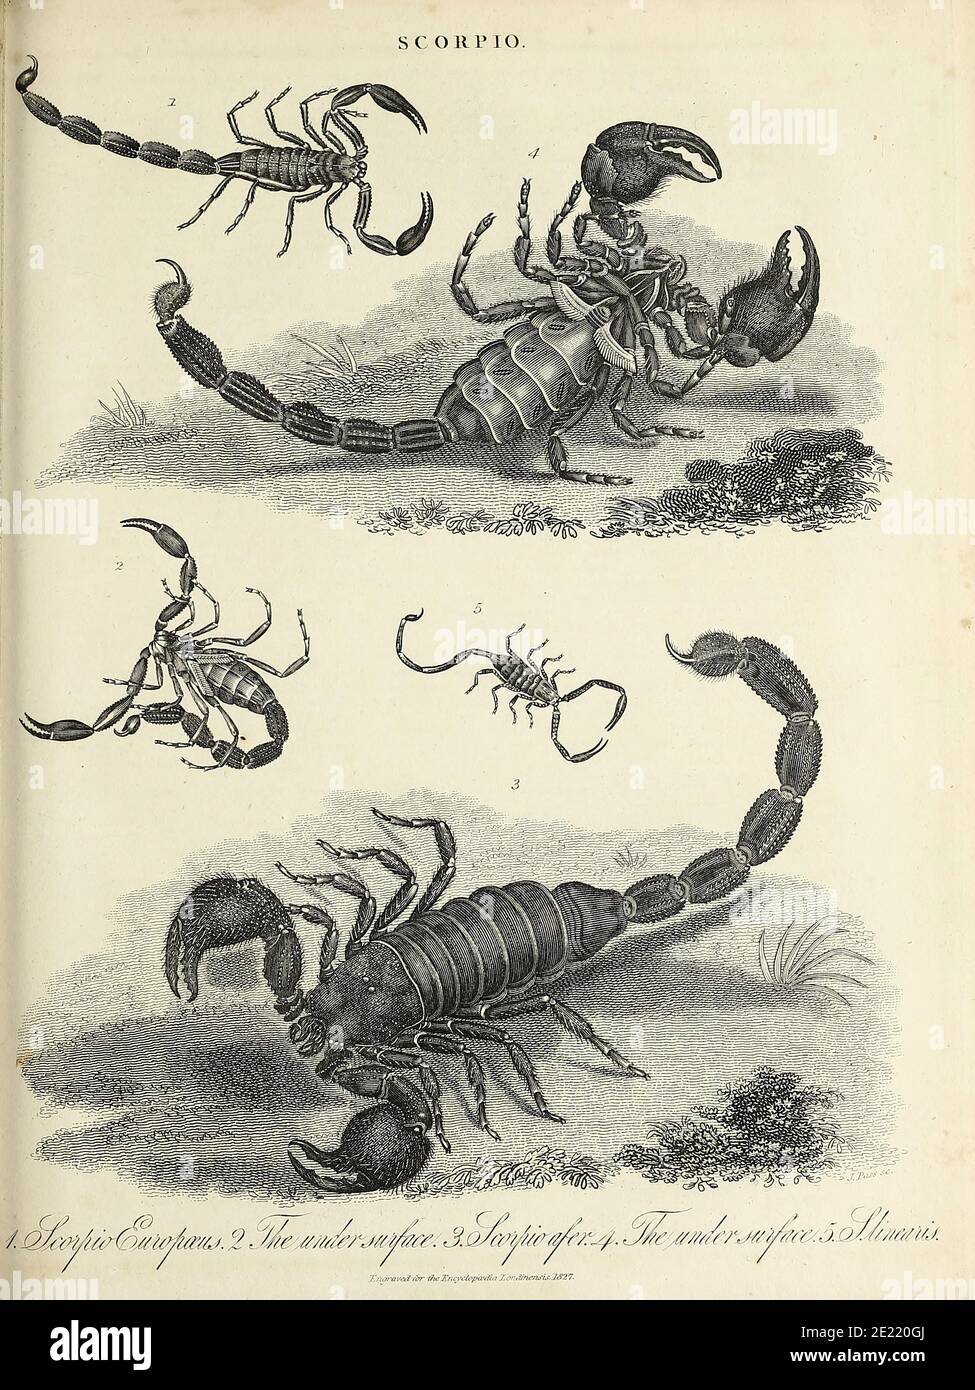 Scorpio [Scorpions] Copperplate engraving From the Encyclopaedia Londinensis or, Universal dictionary of arts, sciences, and literature; Volume XXII;  Edited by Wilkes, John. Published in London in 1827 Stock Photo